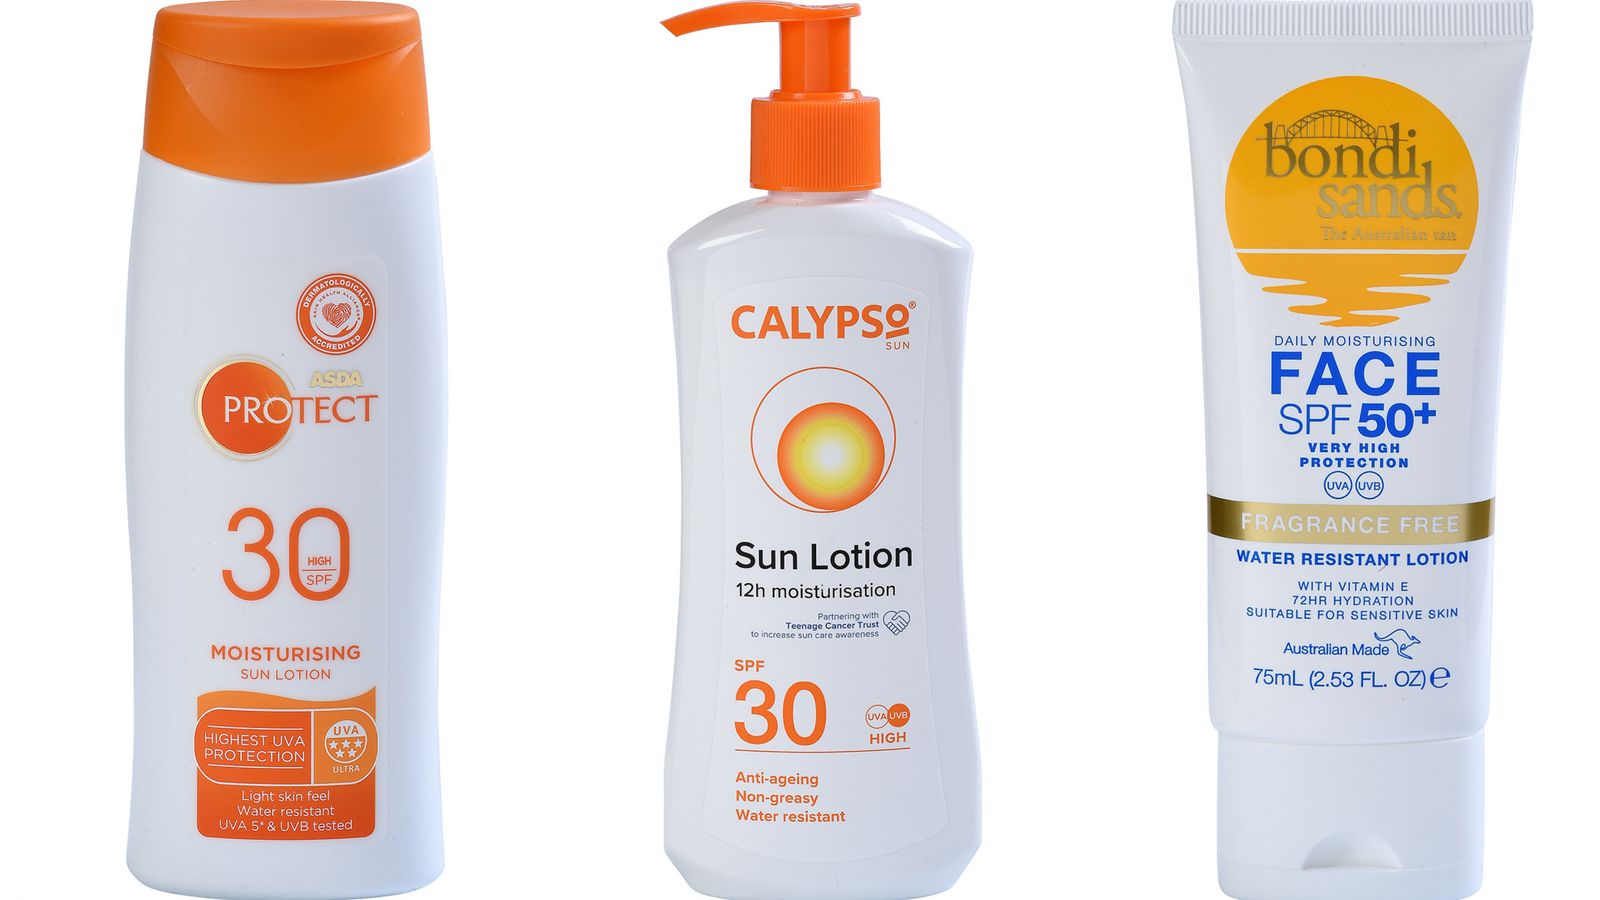 Popular sunscreens fail safety test - as £2.49 rival passes with flying colours